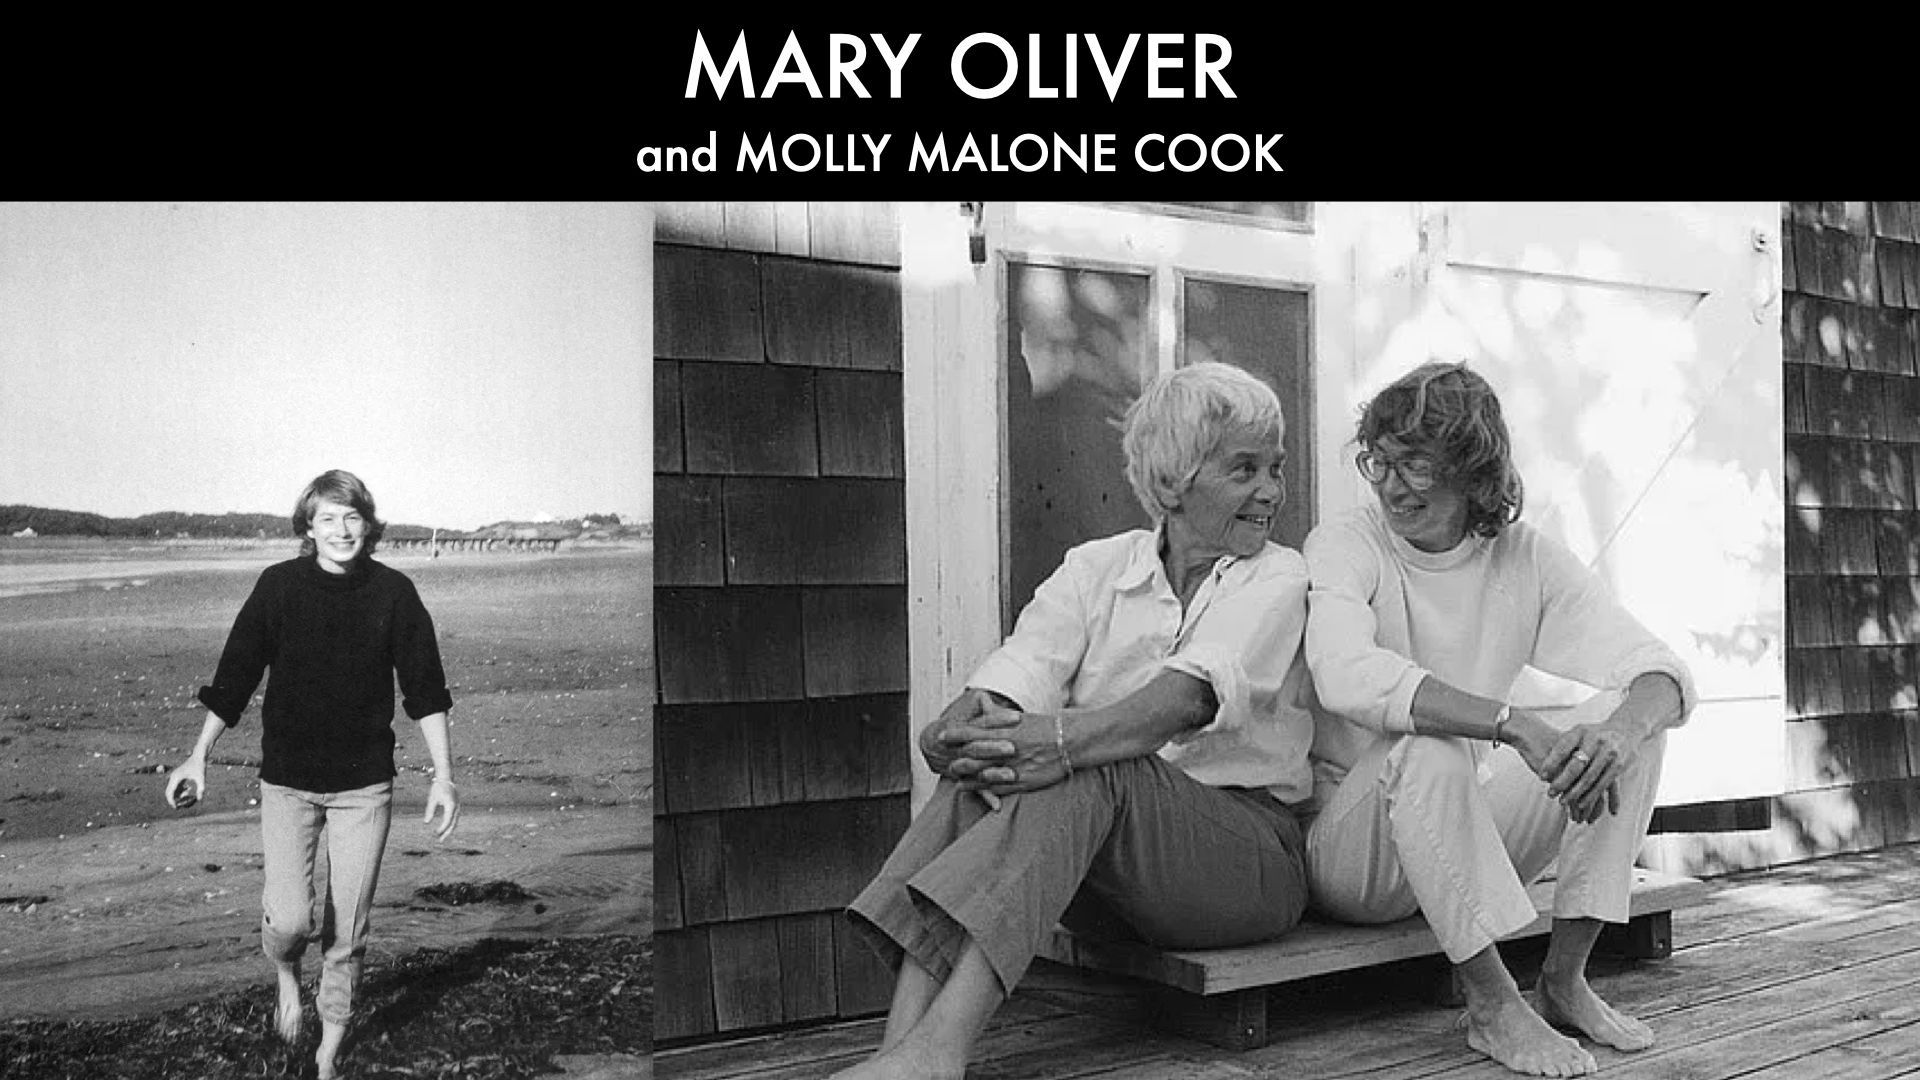 Katie Castagno sings about the relationship between Mary Oliver and Molly Malone Cook in Ptown